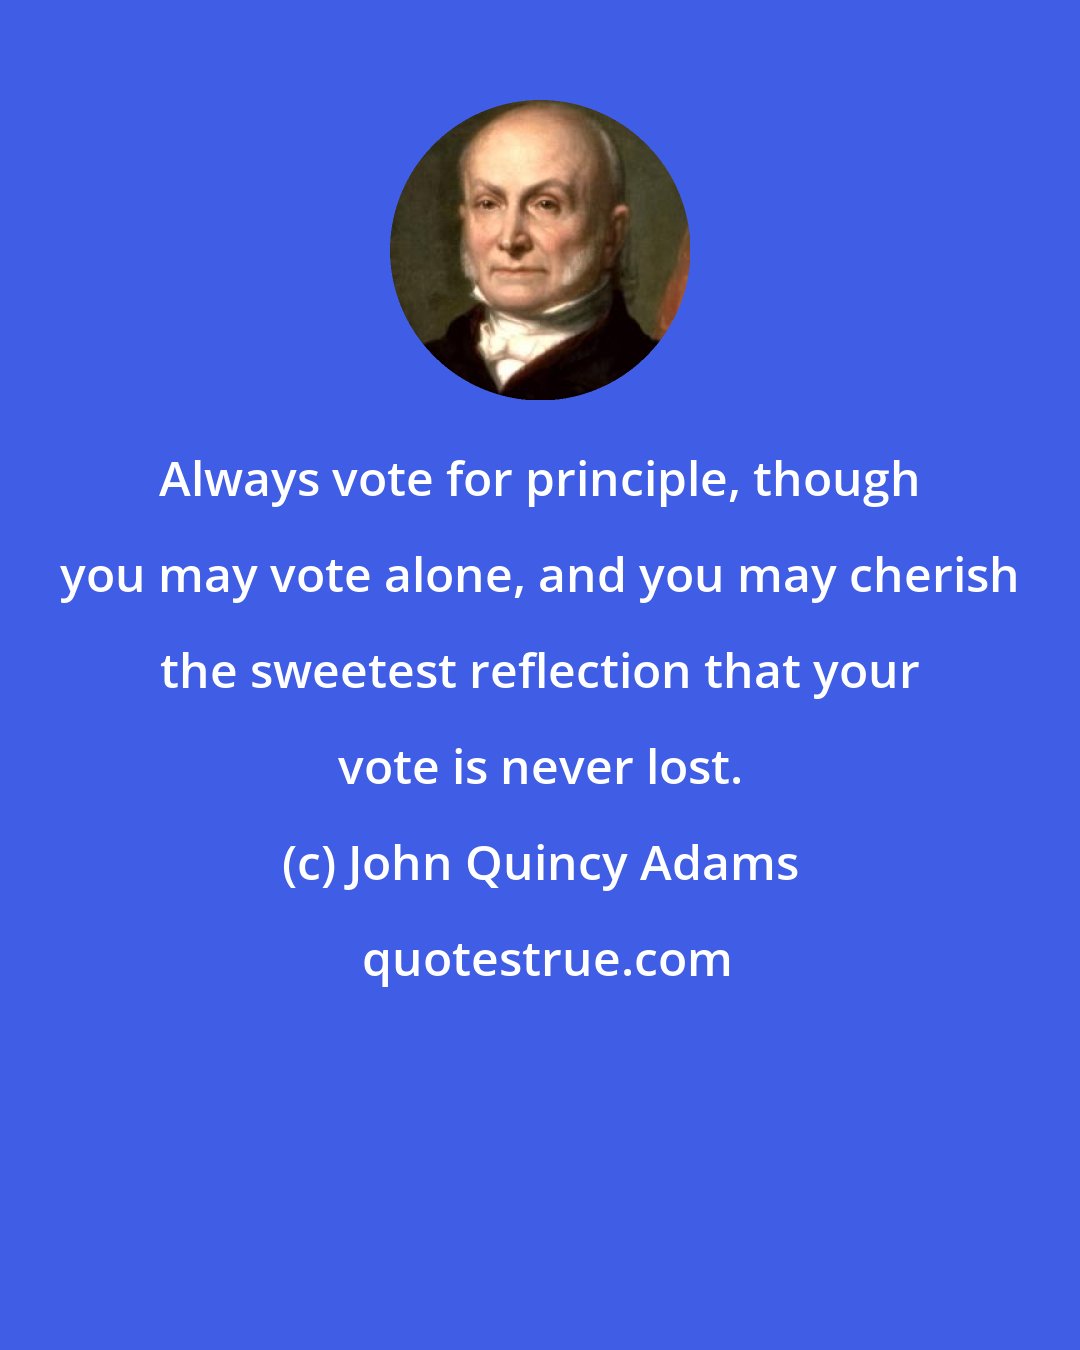 John Quincy Adams: Always vote for principle, though you may vote alone, and you may cherish the sweetest reflection that your vote is never lost.